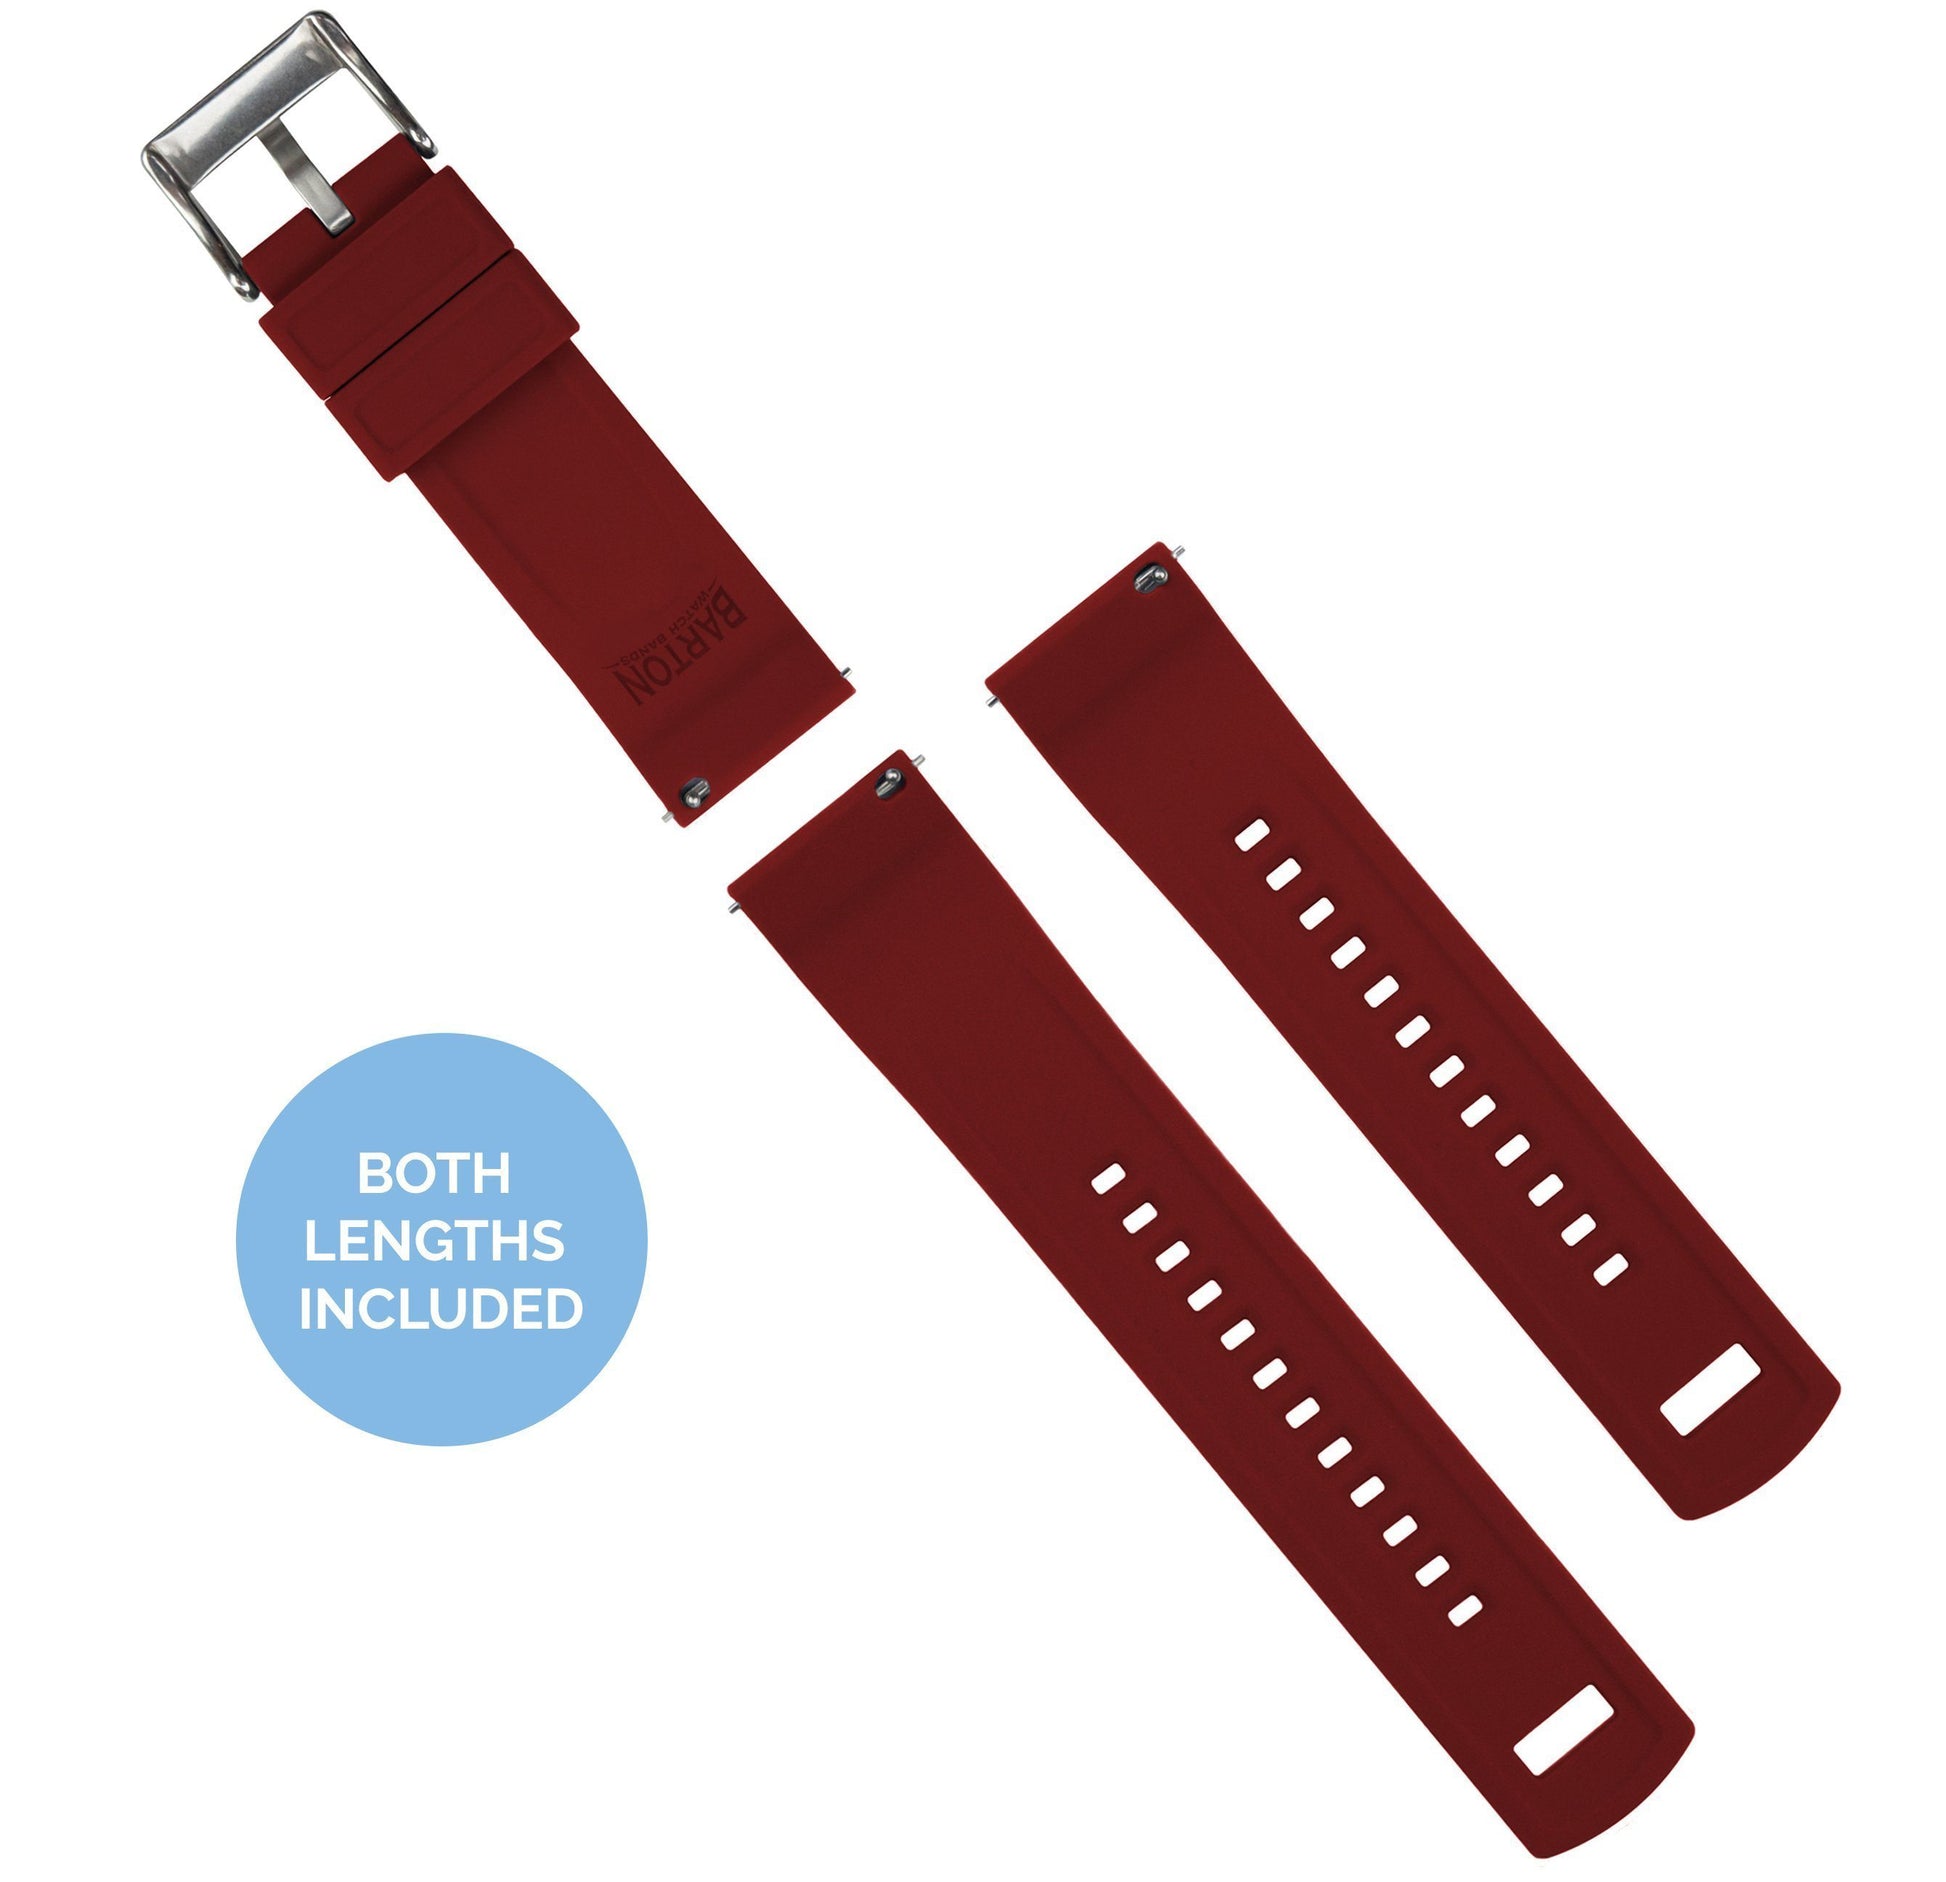 Withings Nokia Activité and Steel HR | Elite Silicone | Crimson Red - Barton Watch Bands